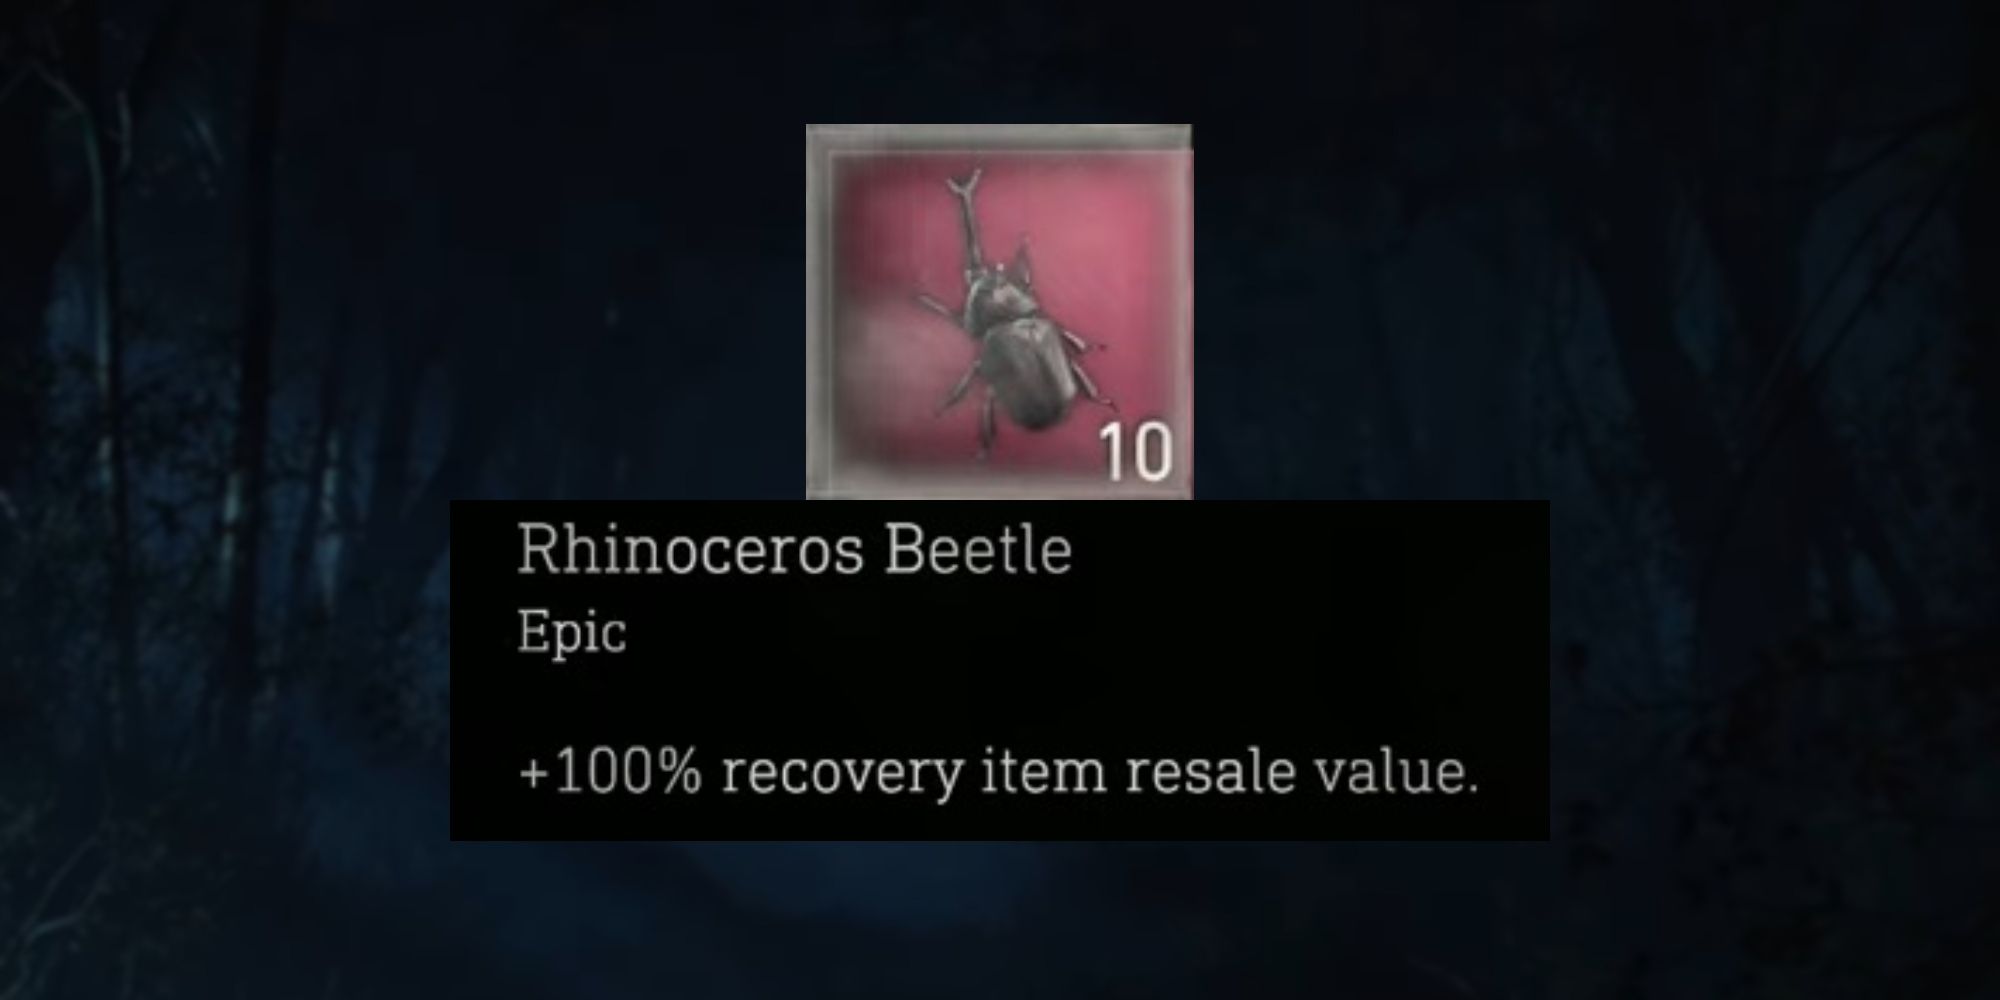 The Rhinoceros Beetle charm from Resident Evil 4.